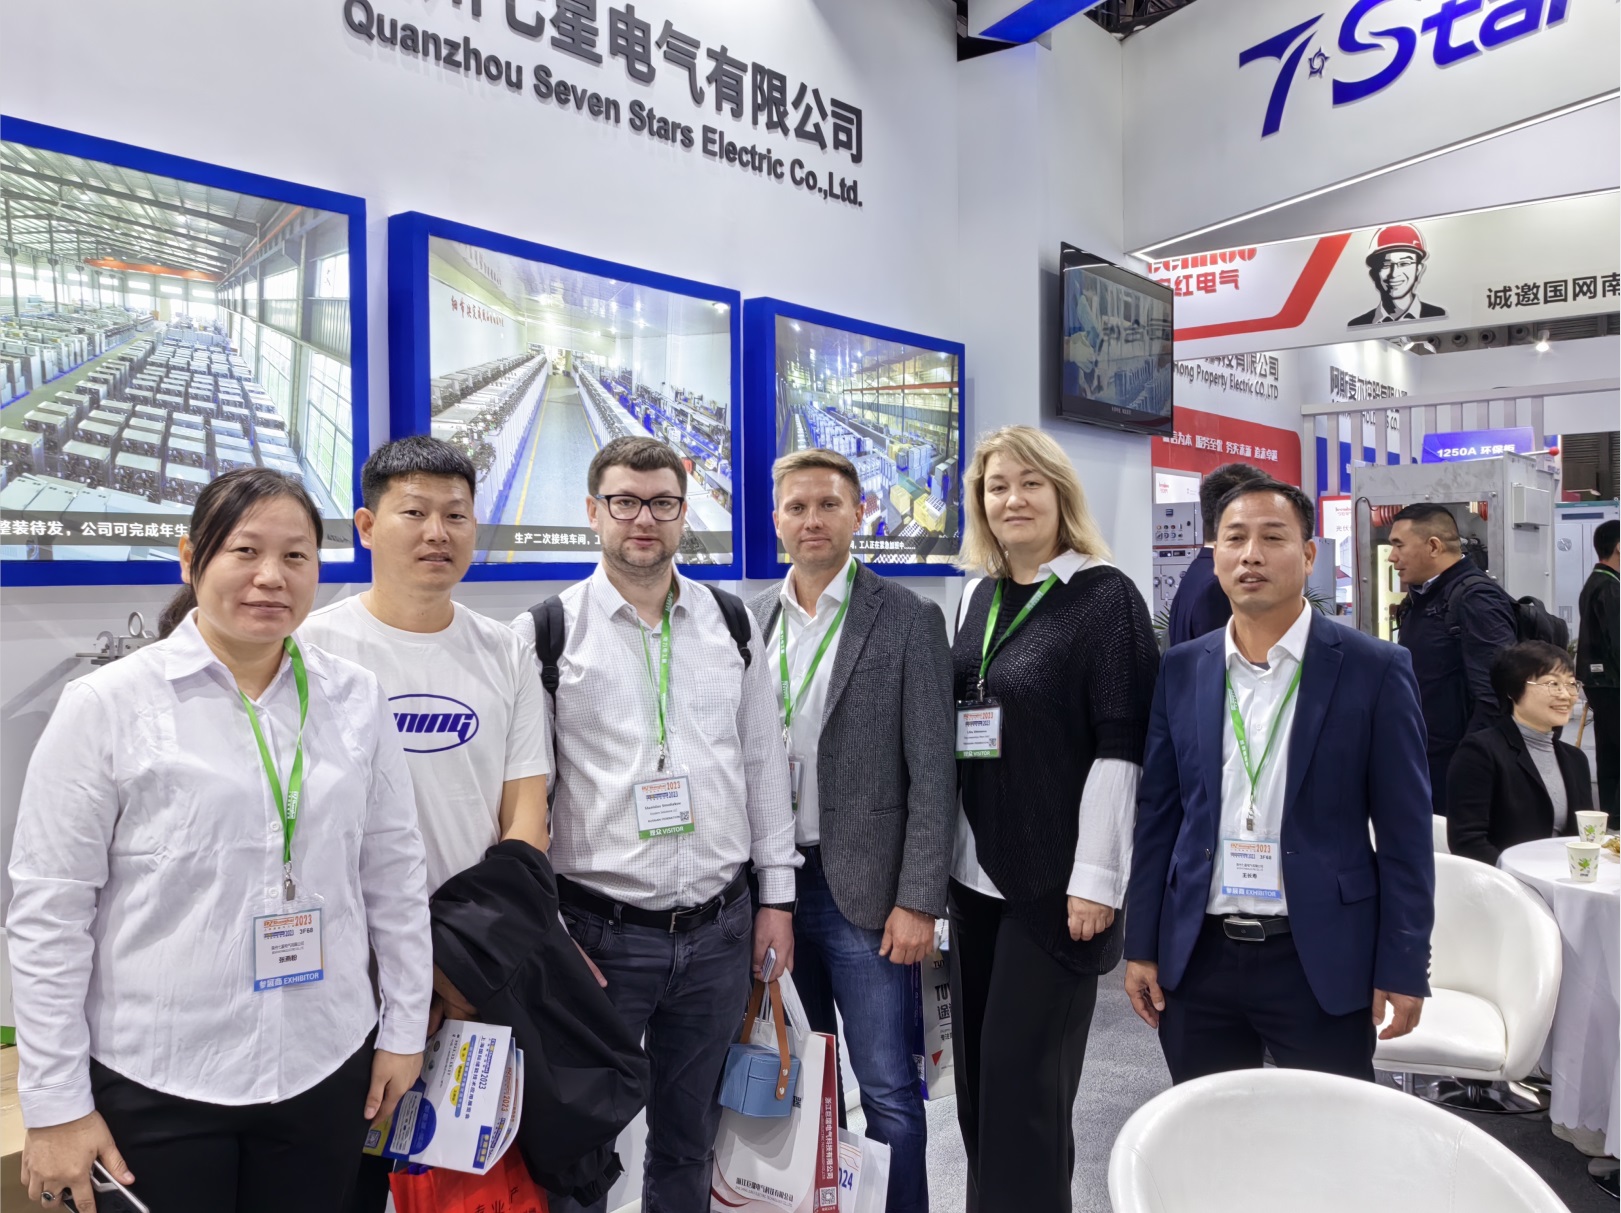 Seven Star Electric Co., Ltd.’s EP Power Exhibition in Shanghai was a complete success